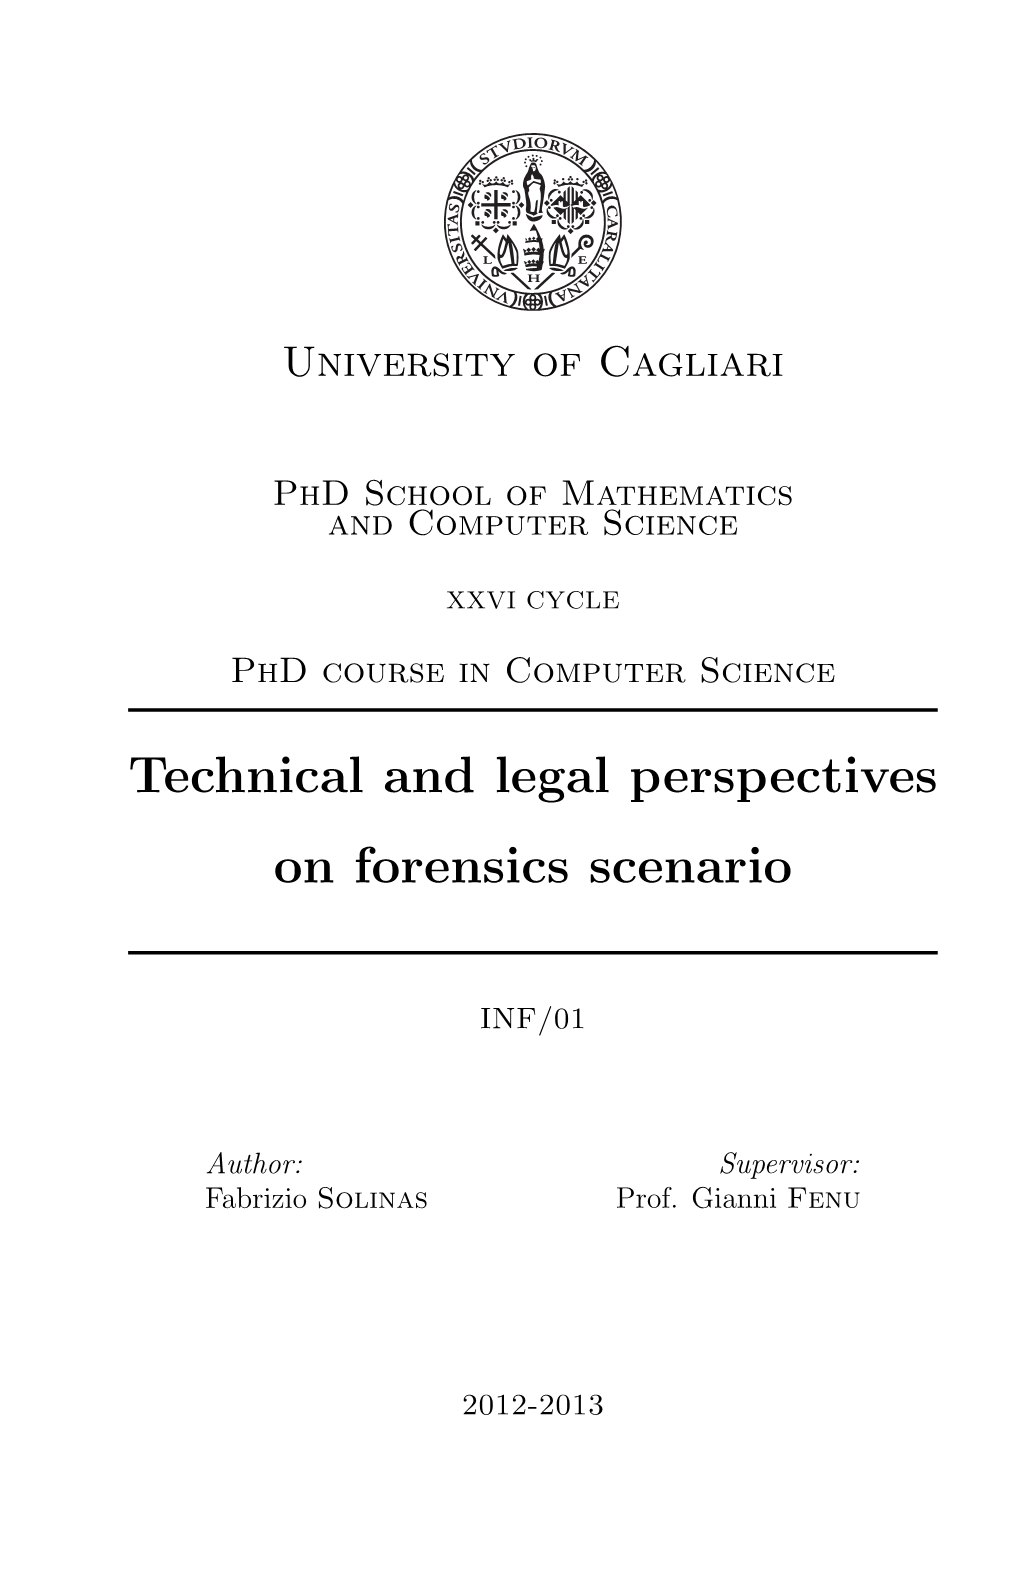 Technical and Legal Perspectives on Forensics Scenario